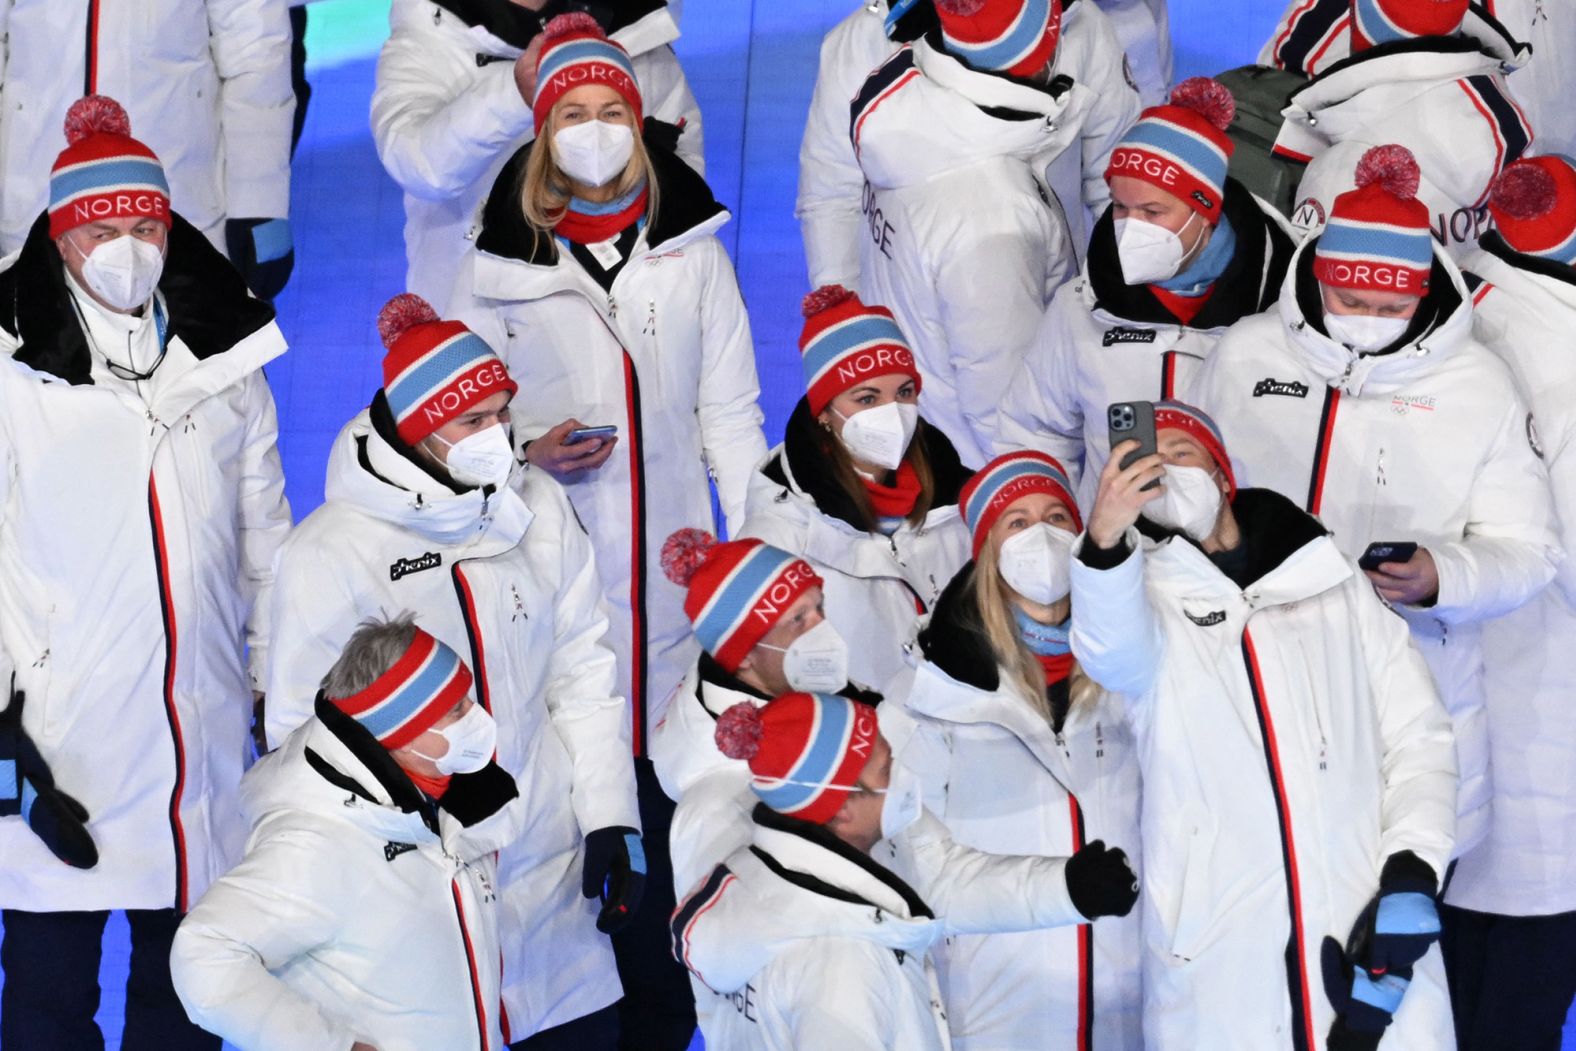 Norway's delegation enters the stadium during the closing ceremony. Norwegian athletes <a href="index.php?page=&url=https%3A%2F%2Fwww.cnn.com%2F2022%2F02%2F20%2Fsport%2Fnorway-beijing-2022-medal-table-spt-intl%2Findex.html" target="_blank">won the most medals in these Olympics</a> and set a record for most golds in one year by one country.